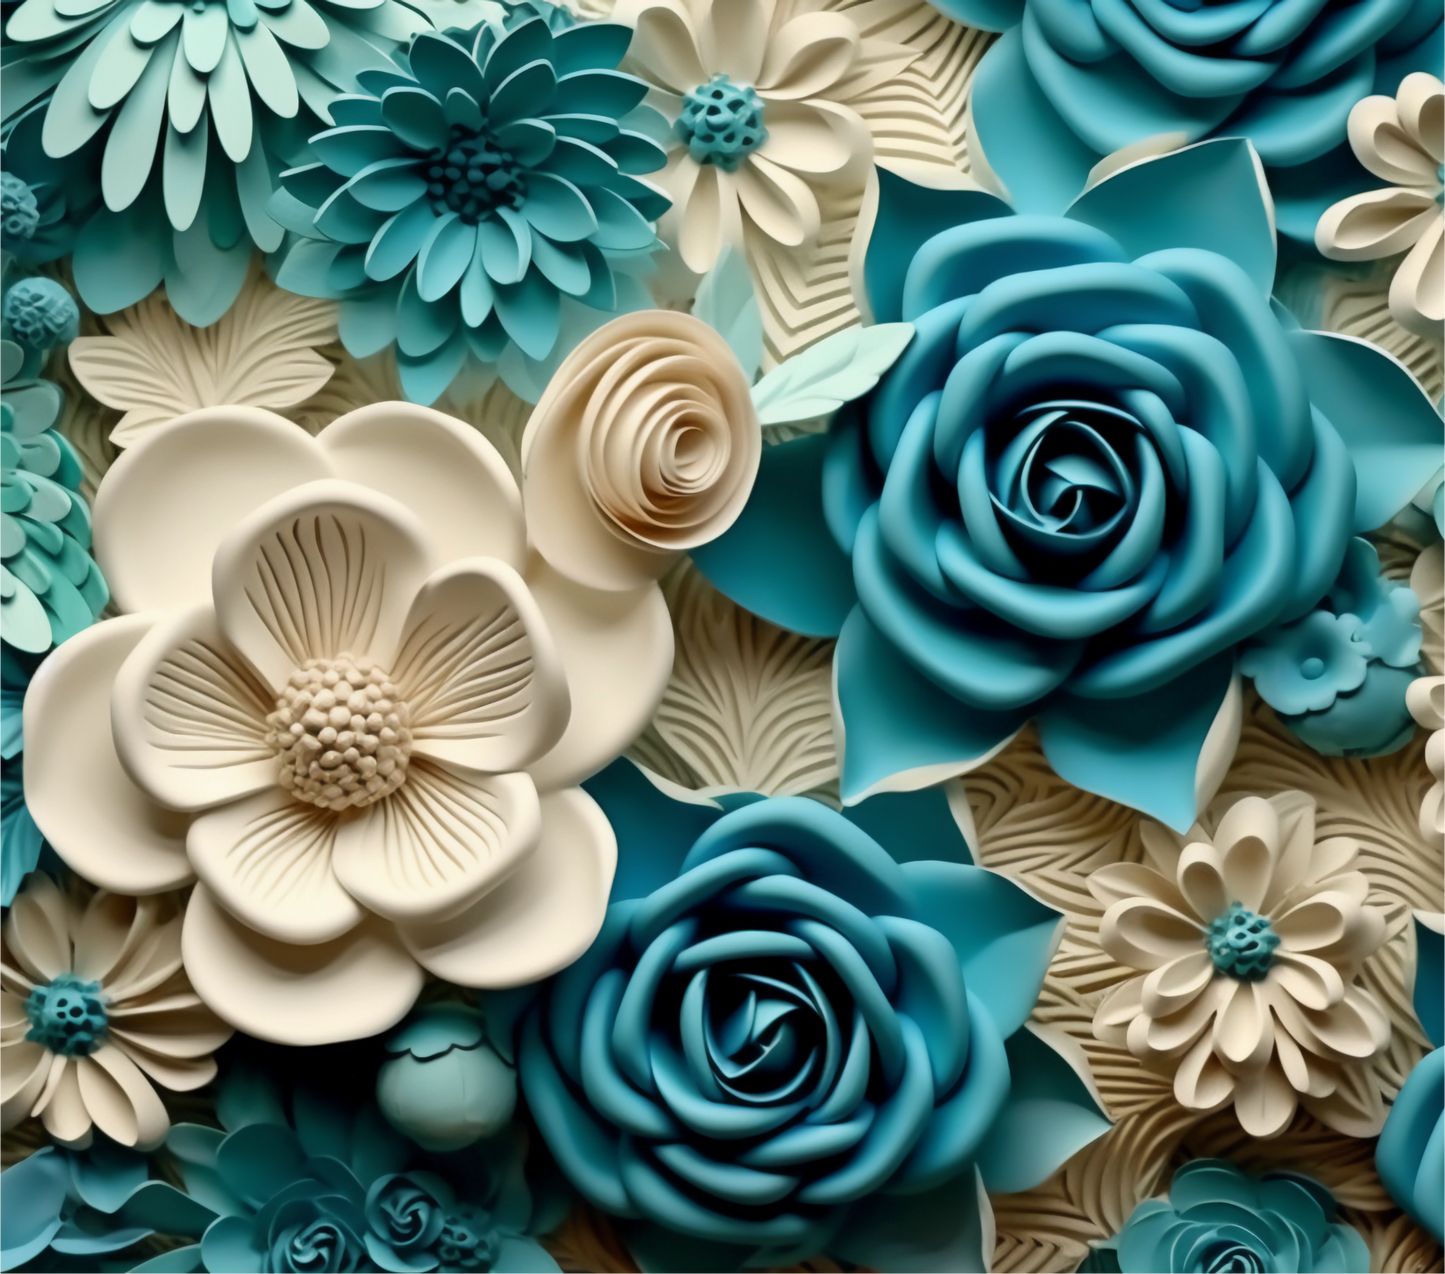 3D BLUE AND WHITE FLORAL